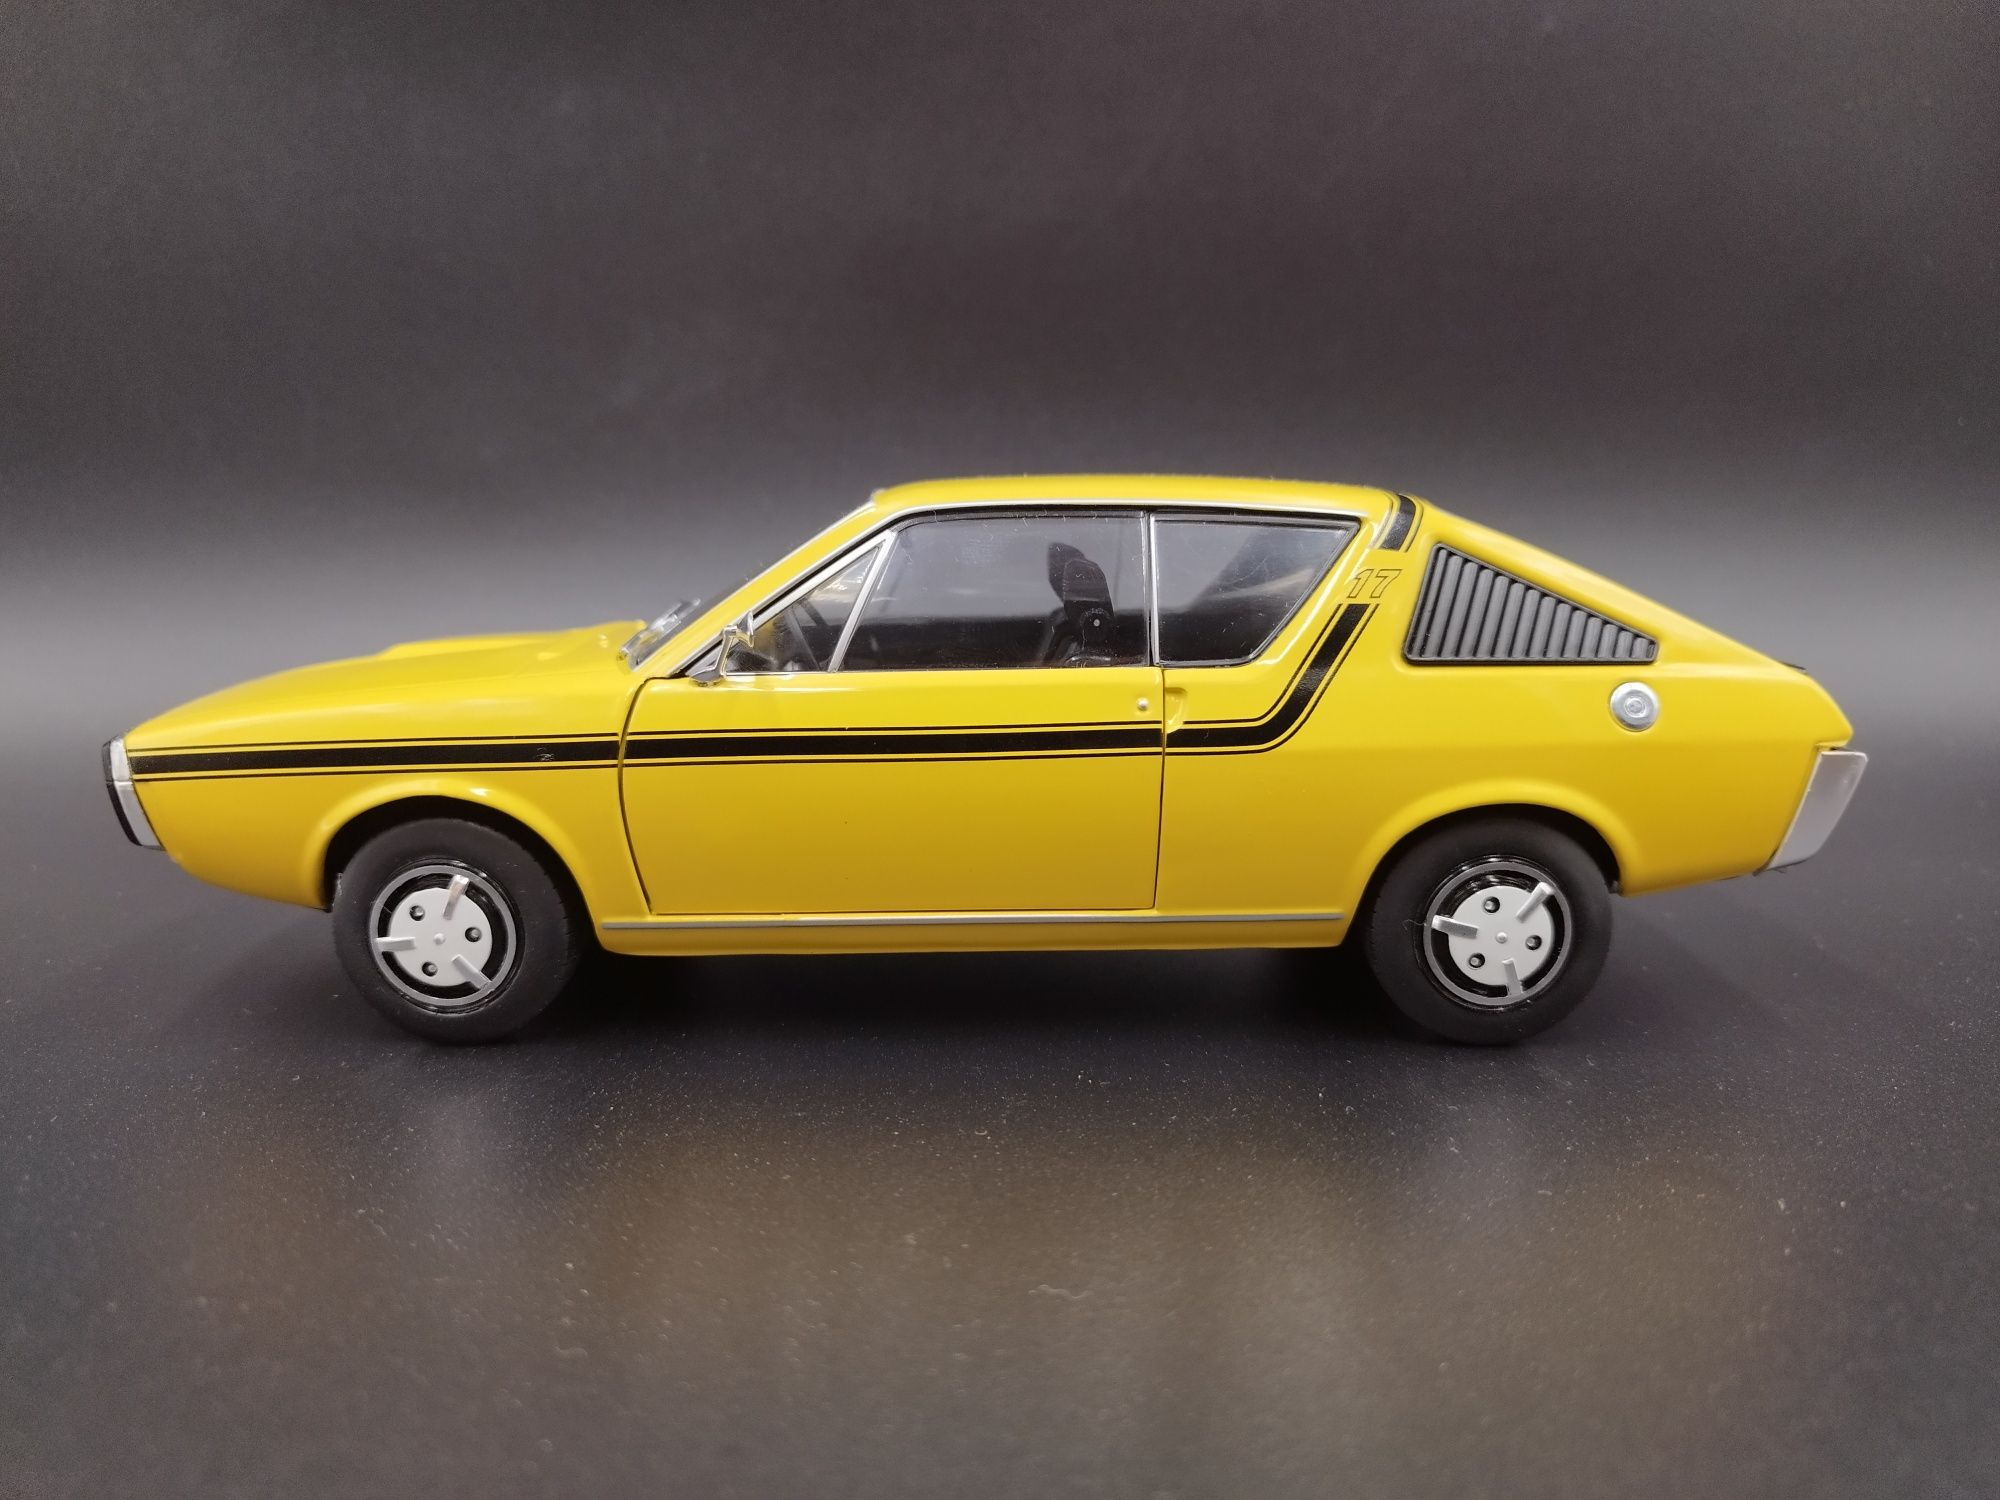 1:18 Solido Renault 17 model nowy